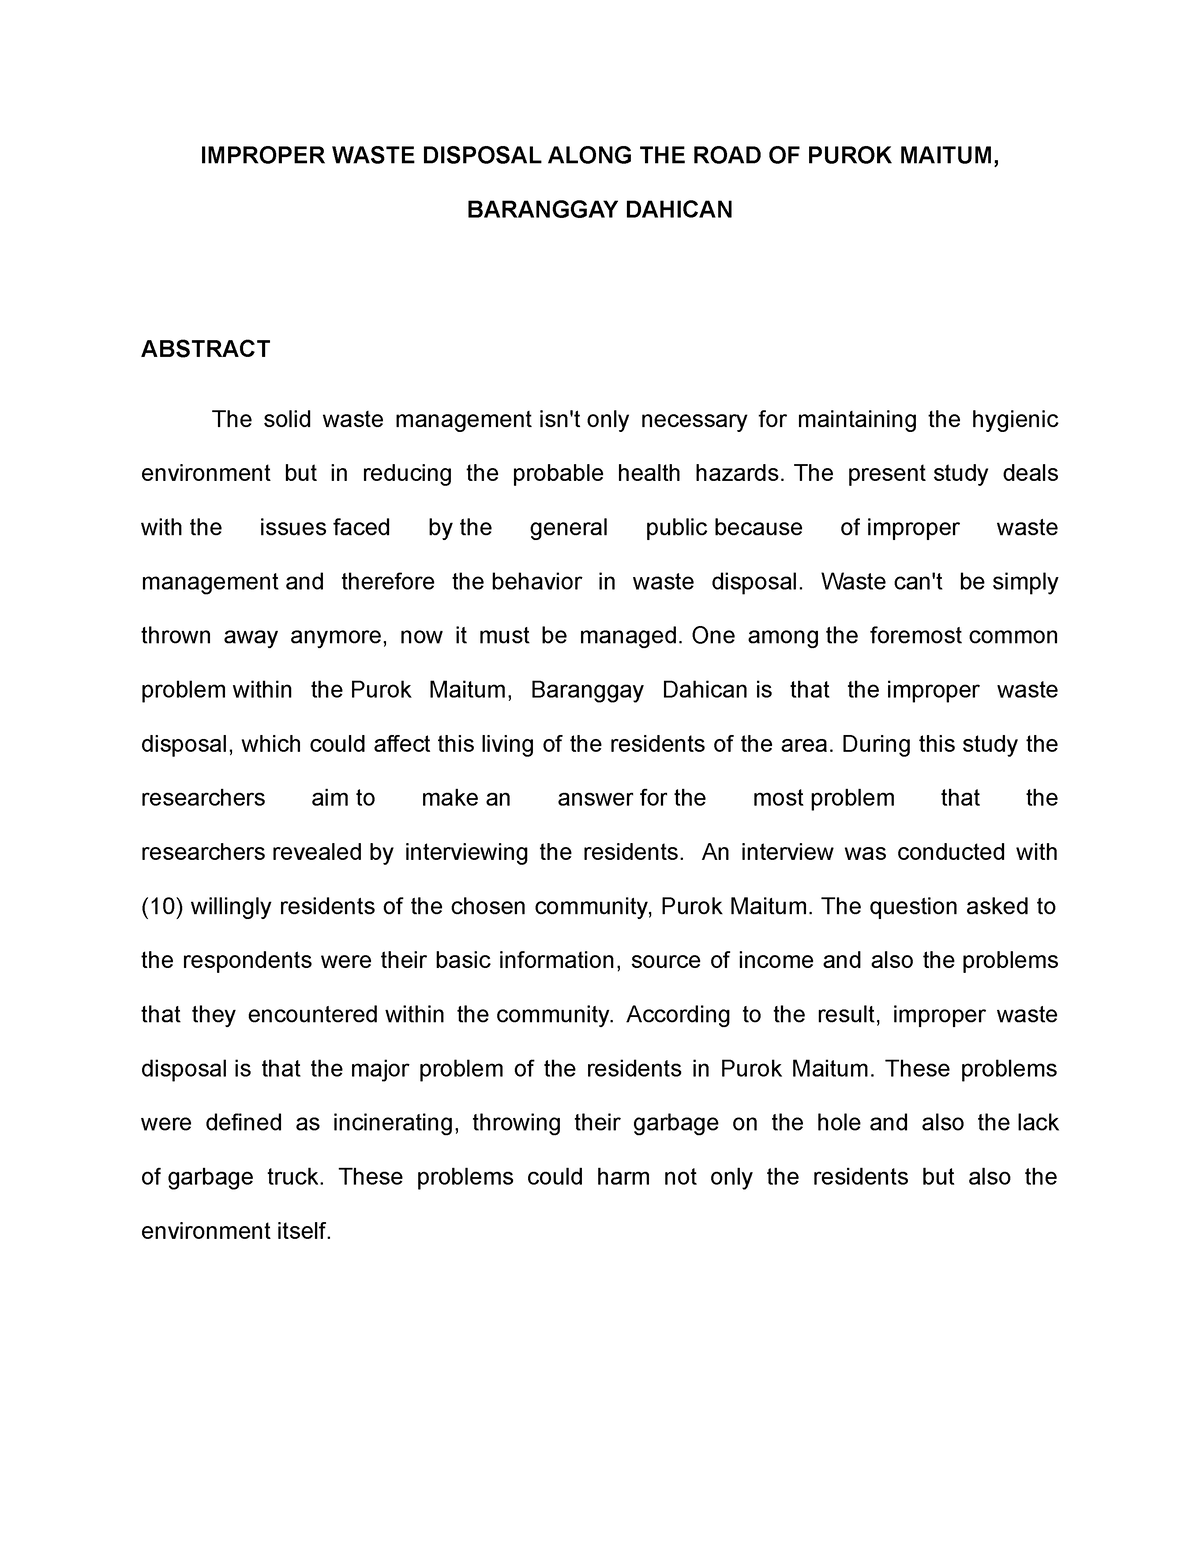 research paper about improper waste disposal in barangay